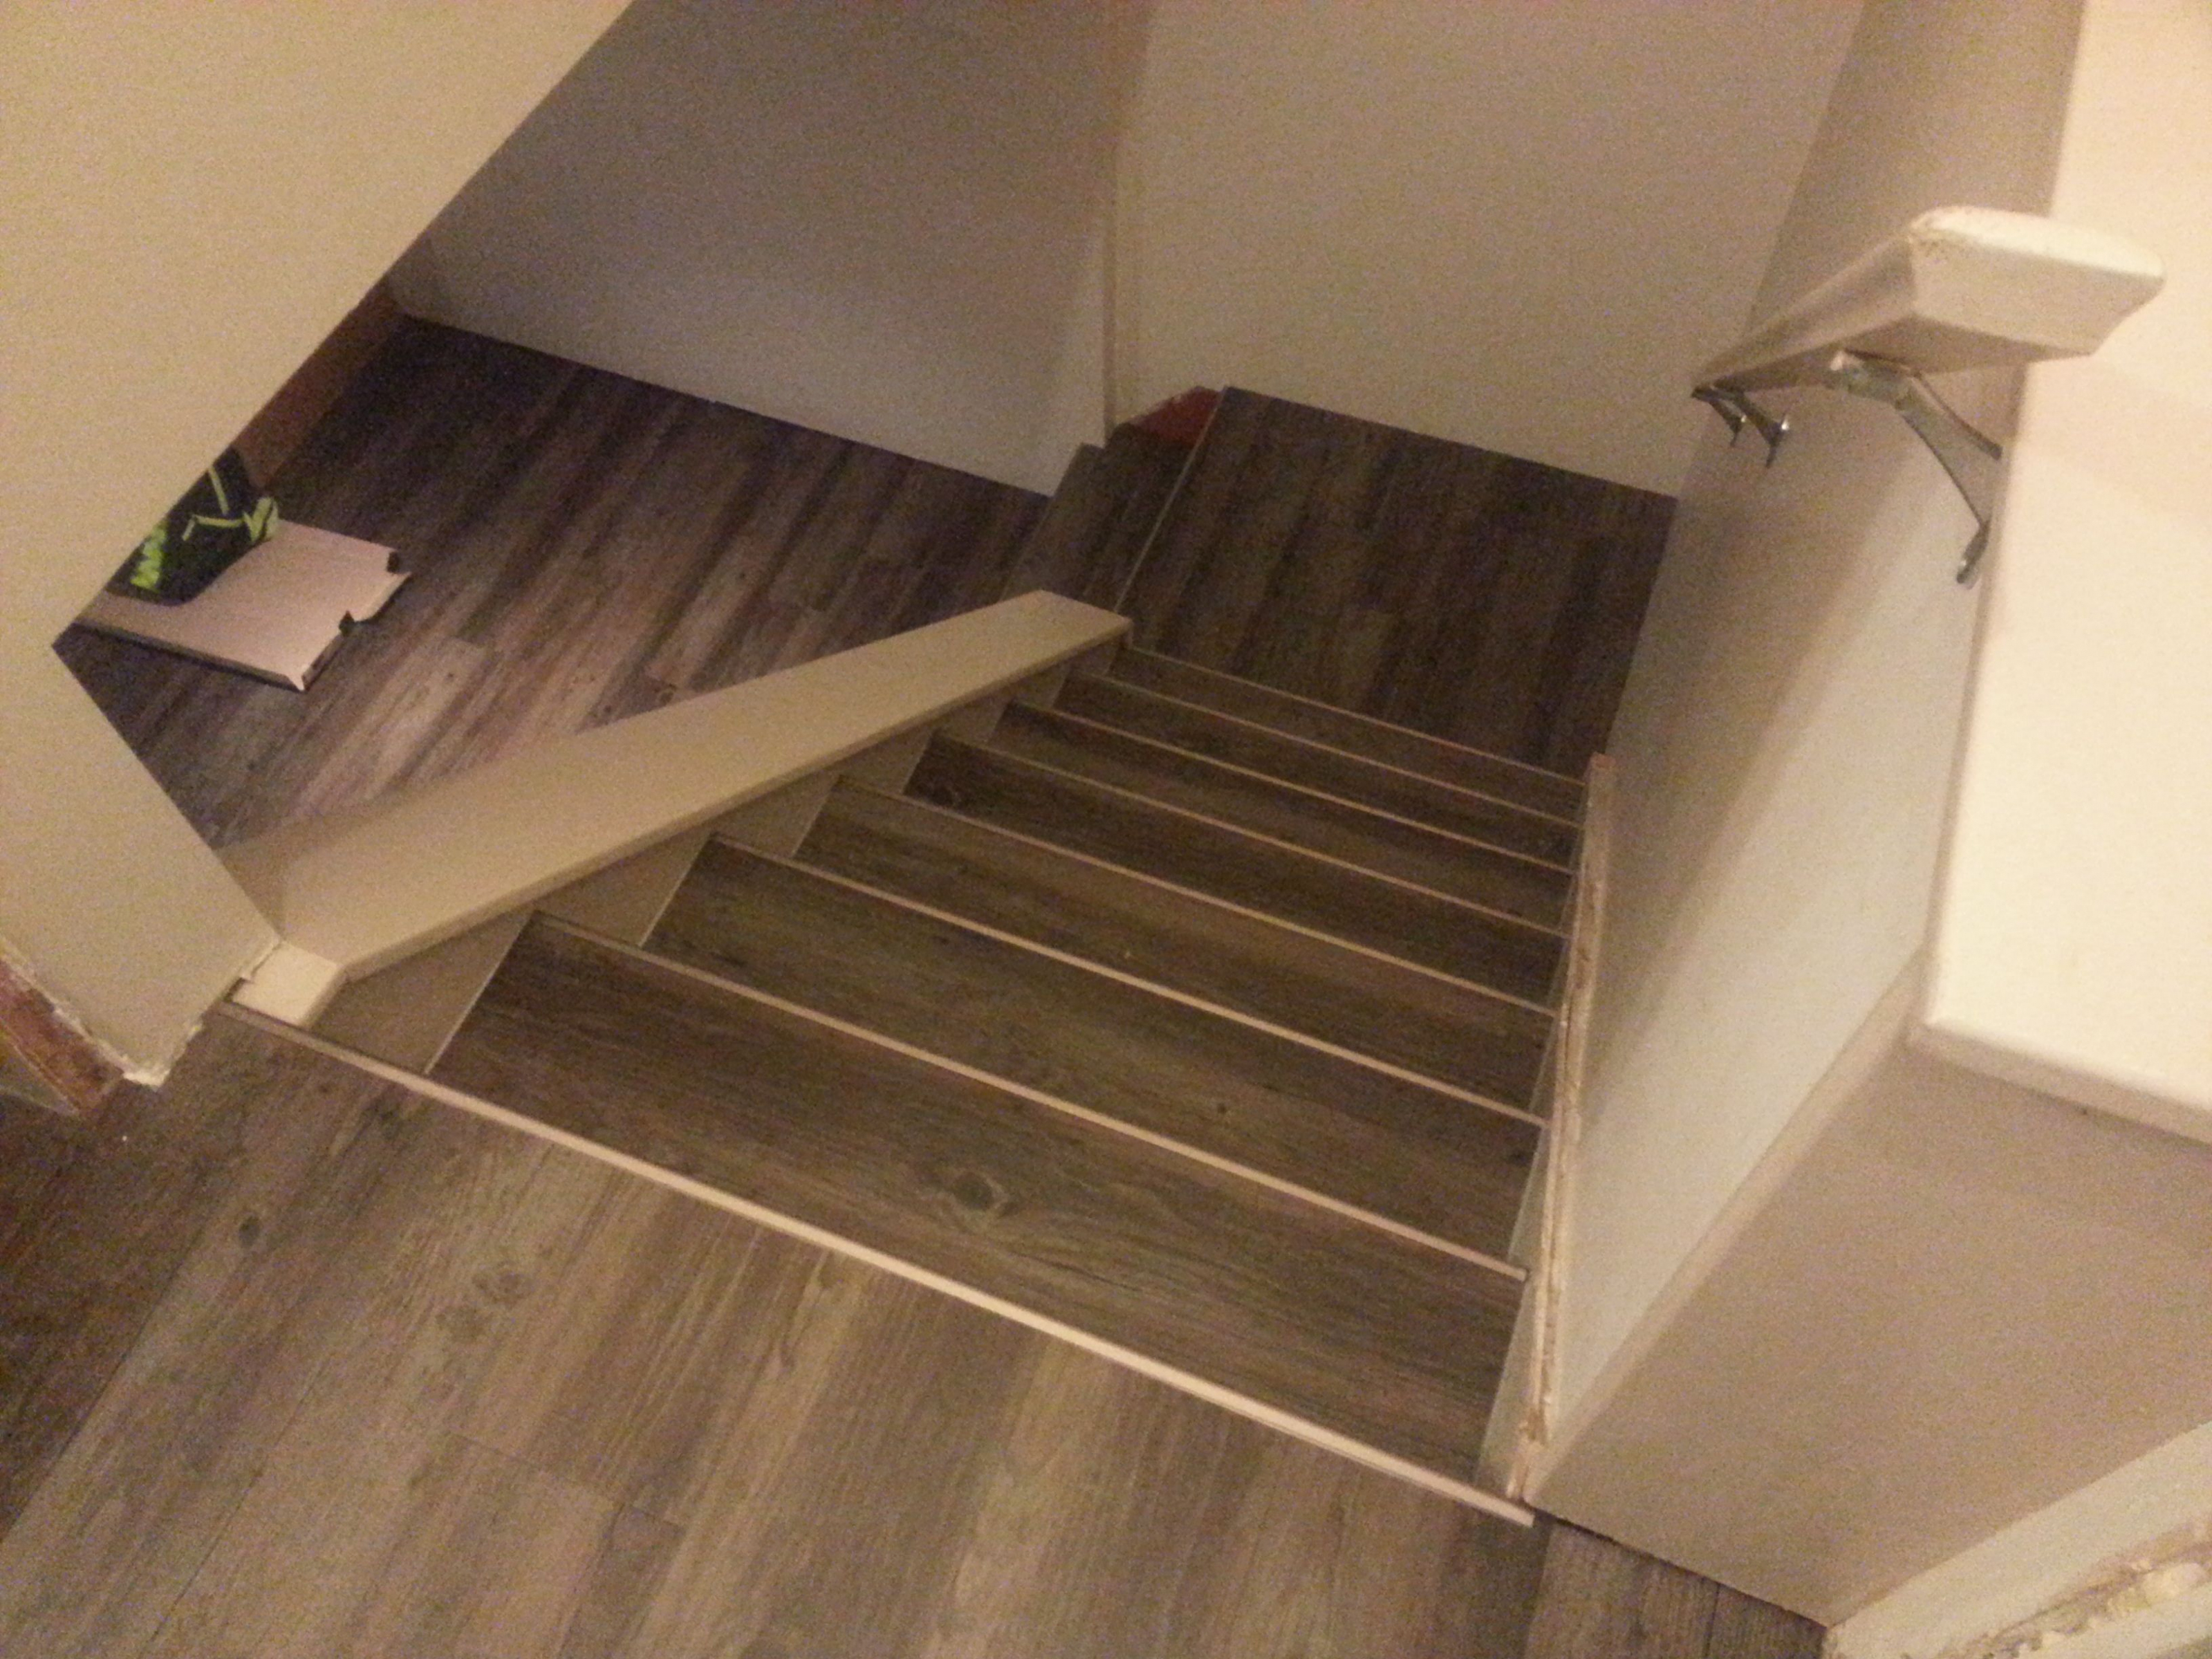 Decor: Vinyl Stair Treads With Nosing For Carpeted Stairs : Why ...